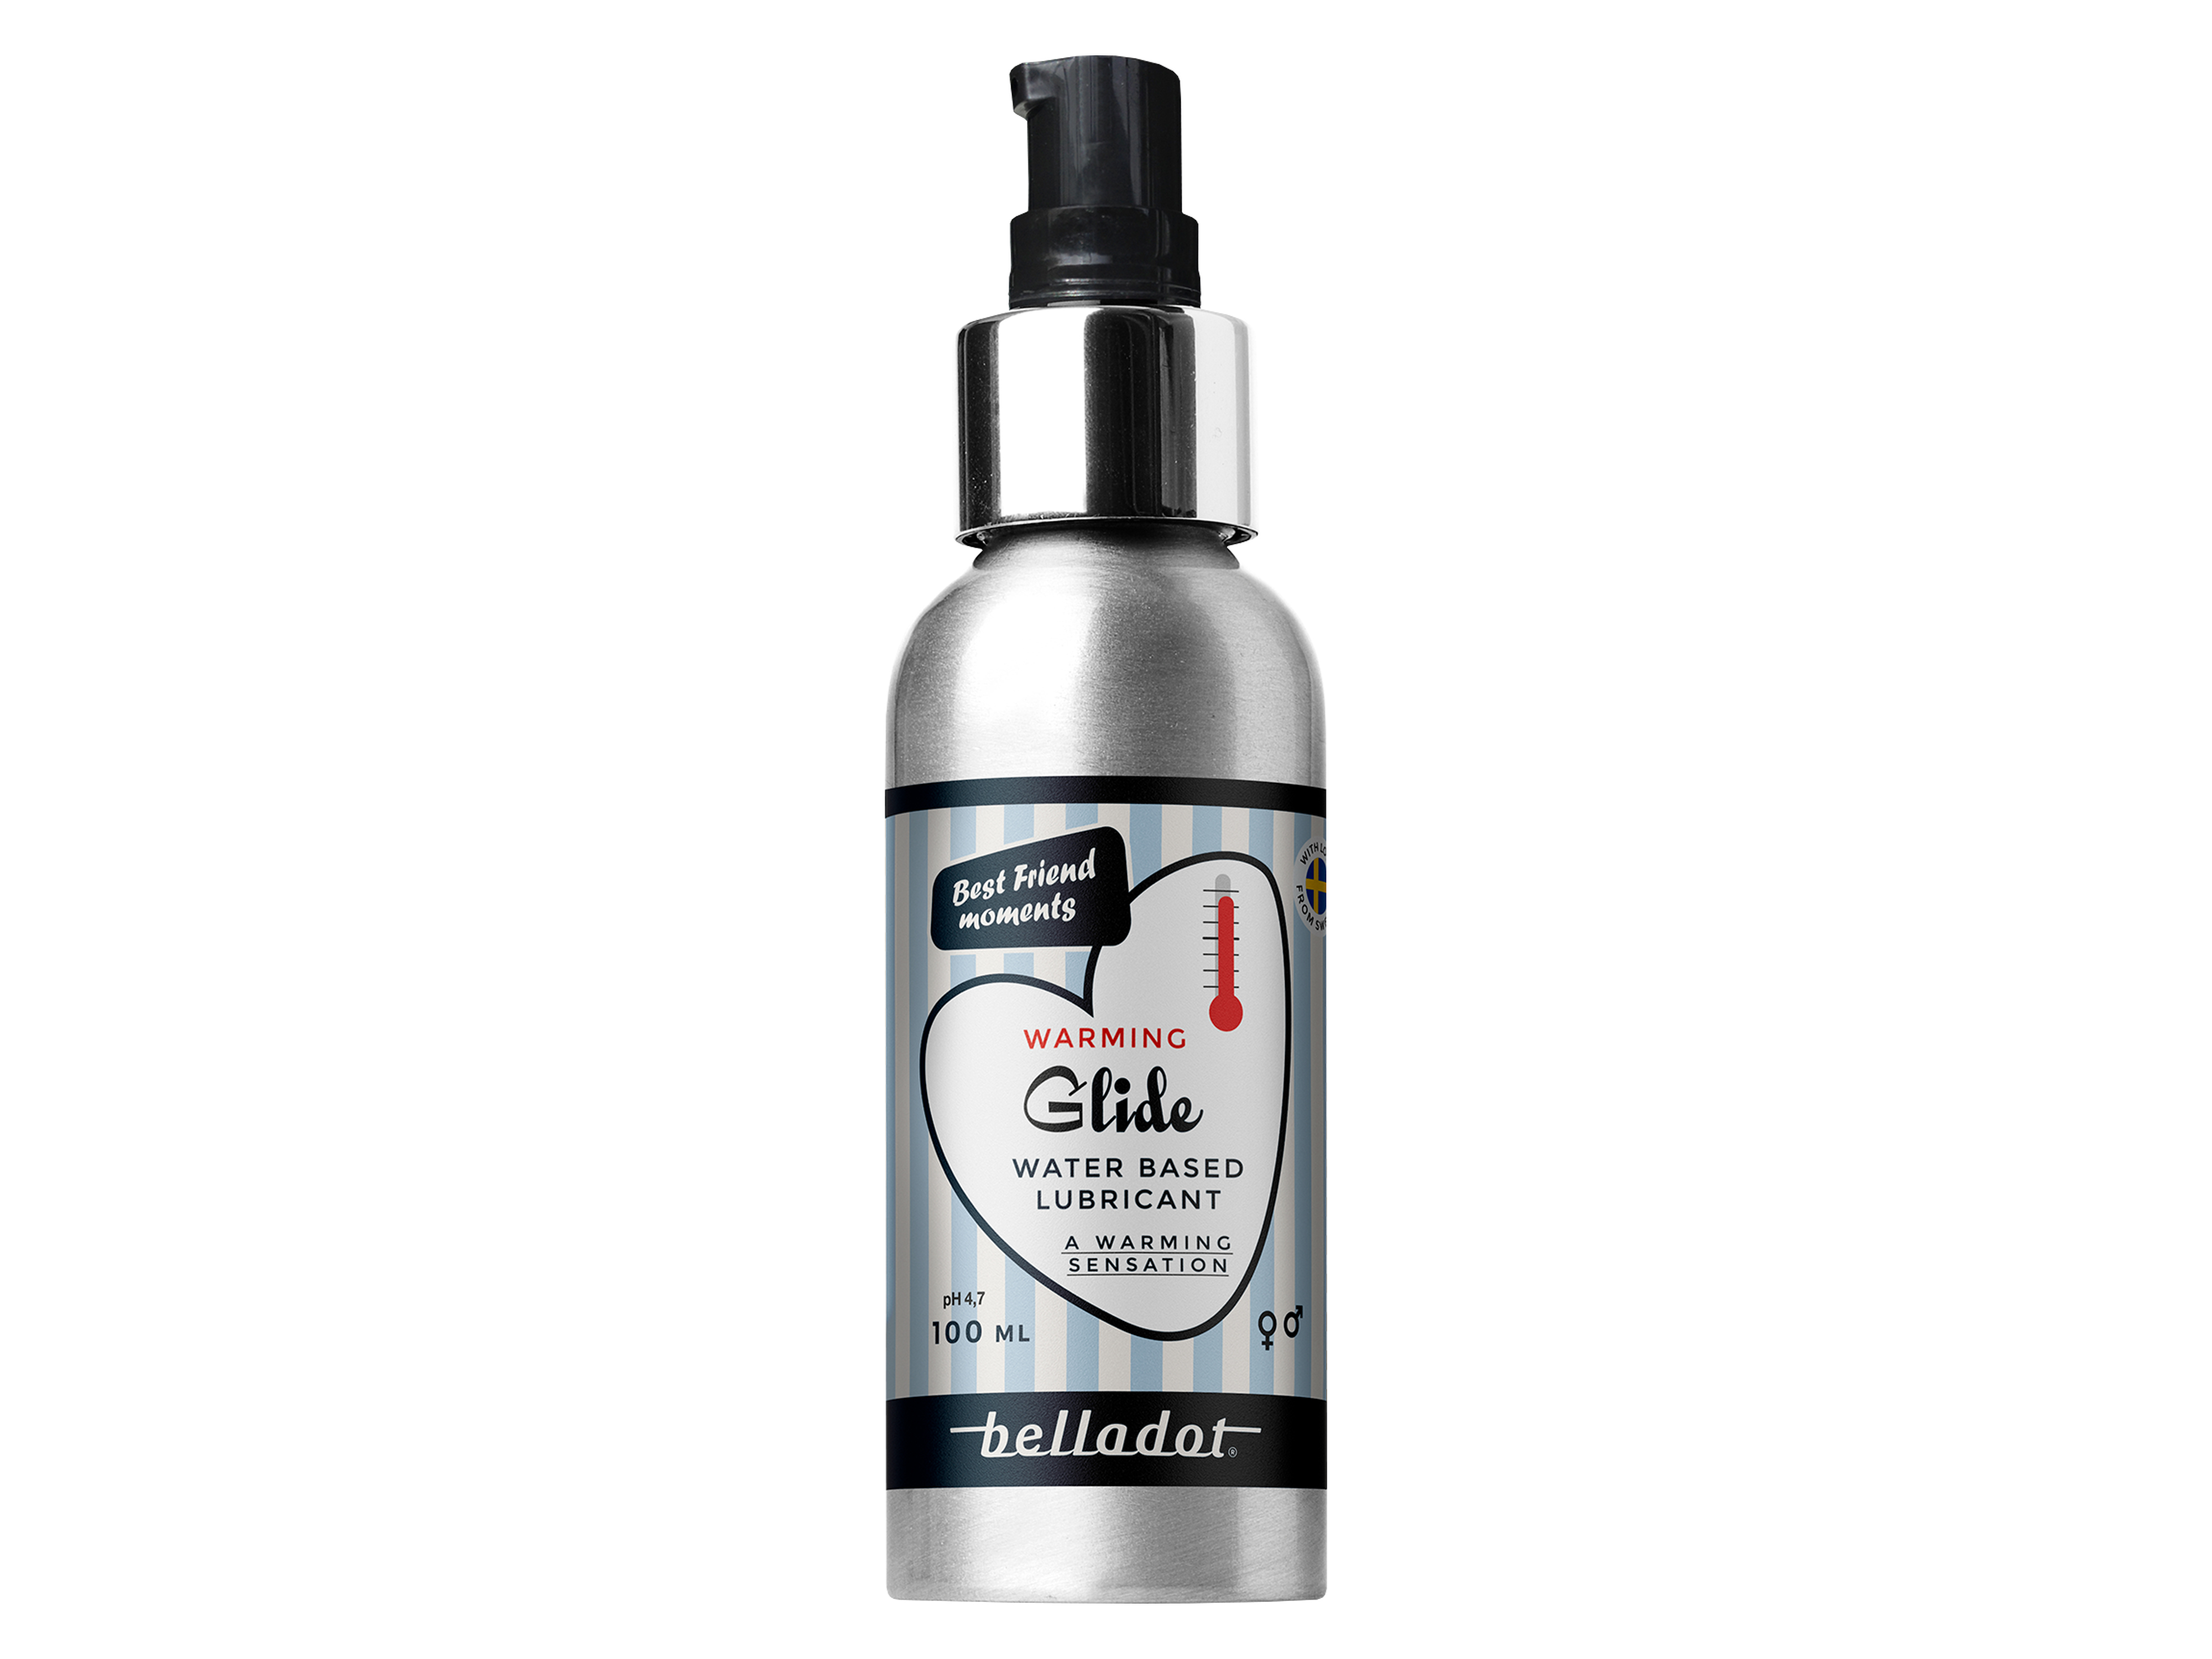 Warming Lubricant Water Based, 100 ml